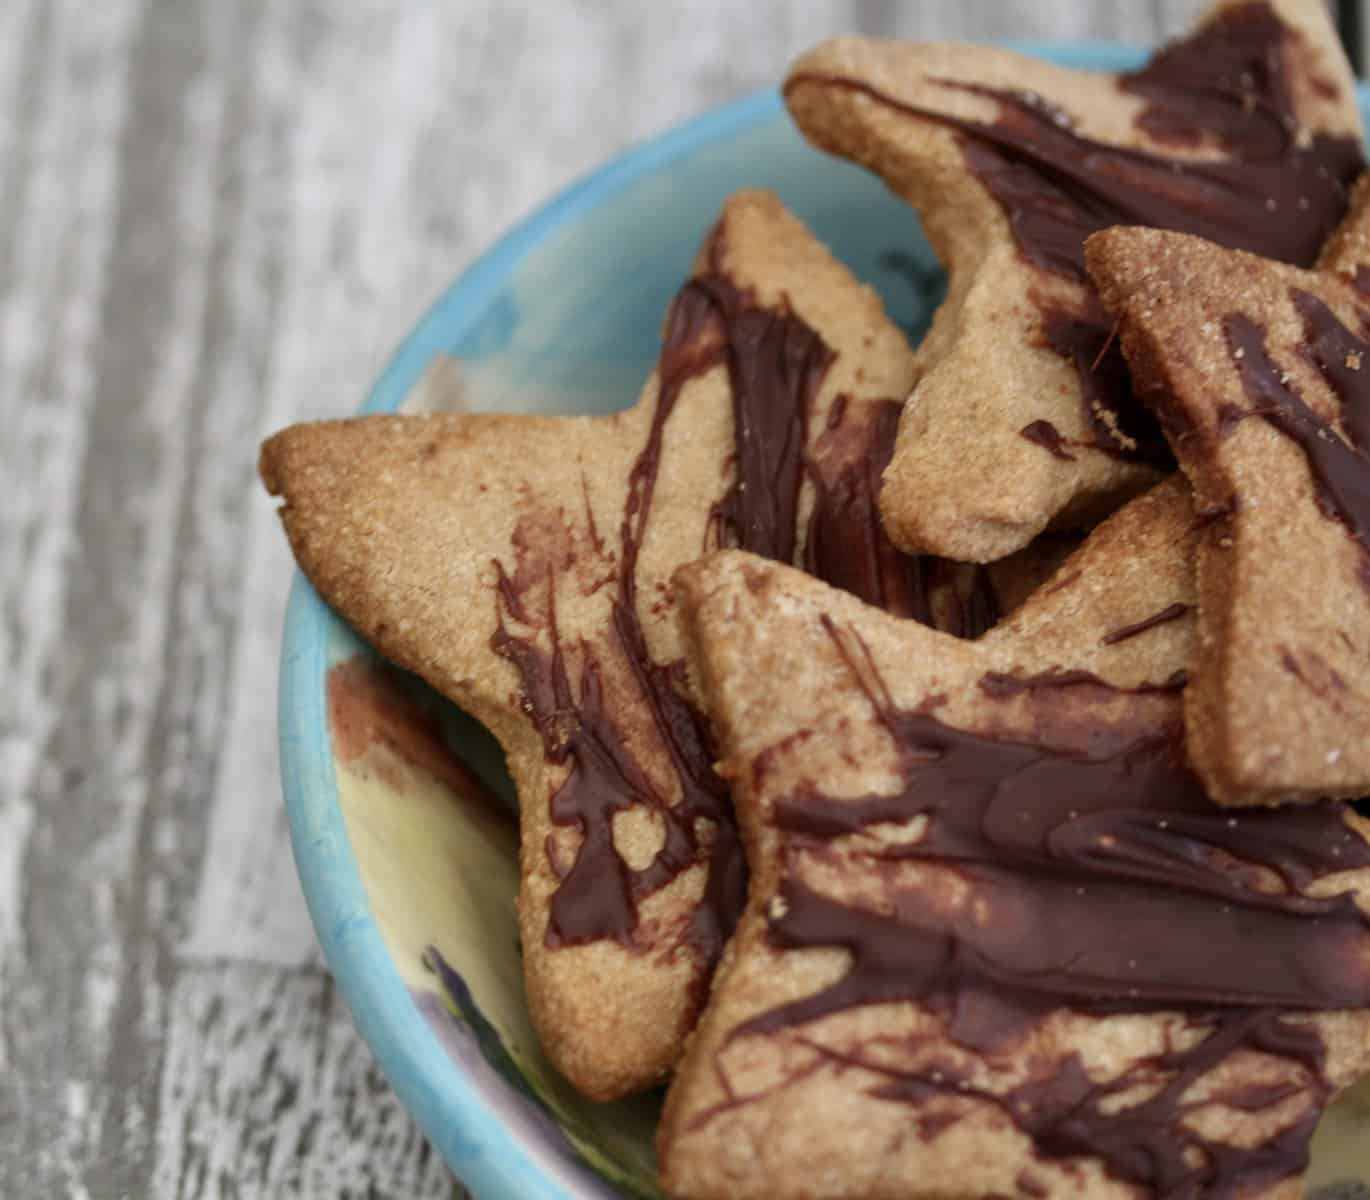 Gluten free shortbread cookies drizzled with chocolate and cut into the shape of stars.